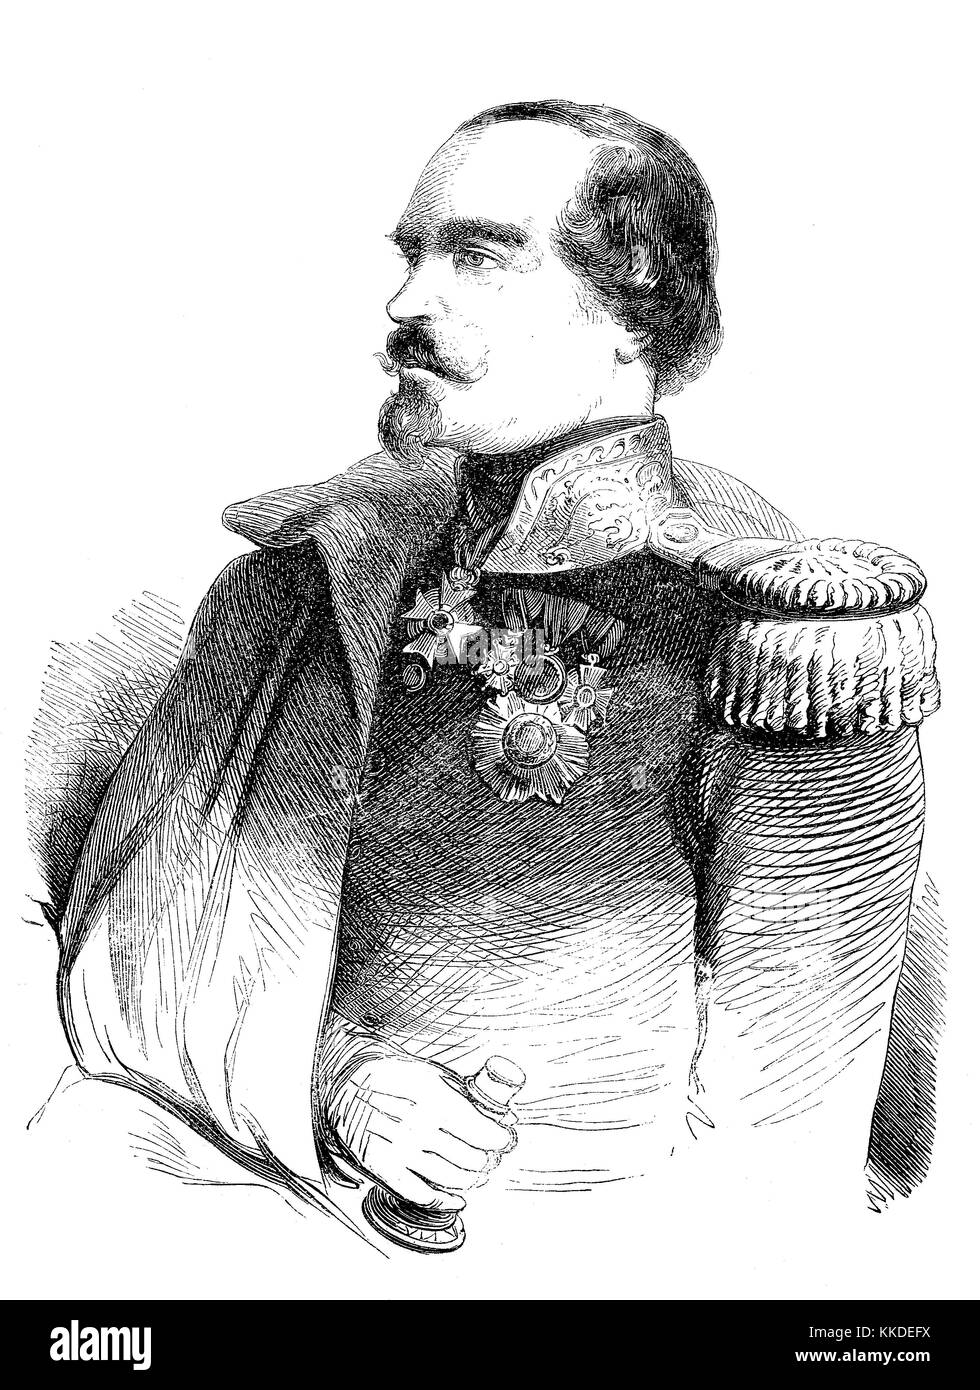 Francois-Marcellin Certain de Canrobert, June 27, 1809 - January 28, 1895, was a French Marshal, pictures of the time of 1855, Digital improved reproduction of an original woodcut Stock Photo